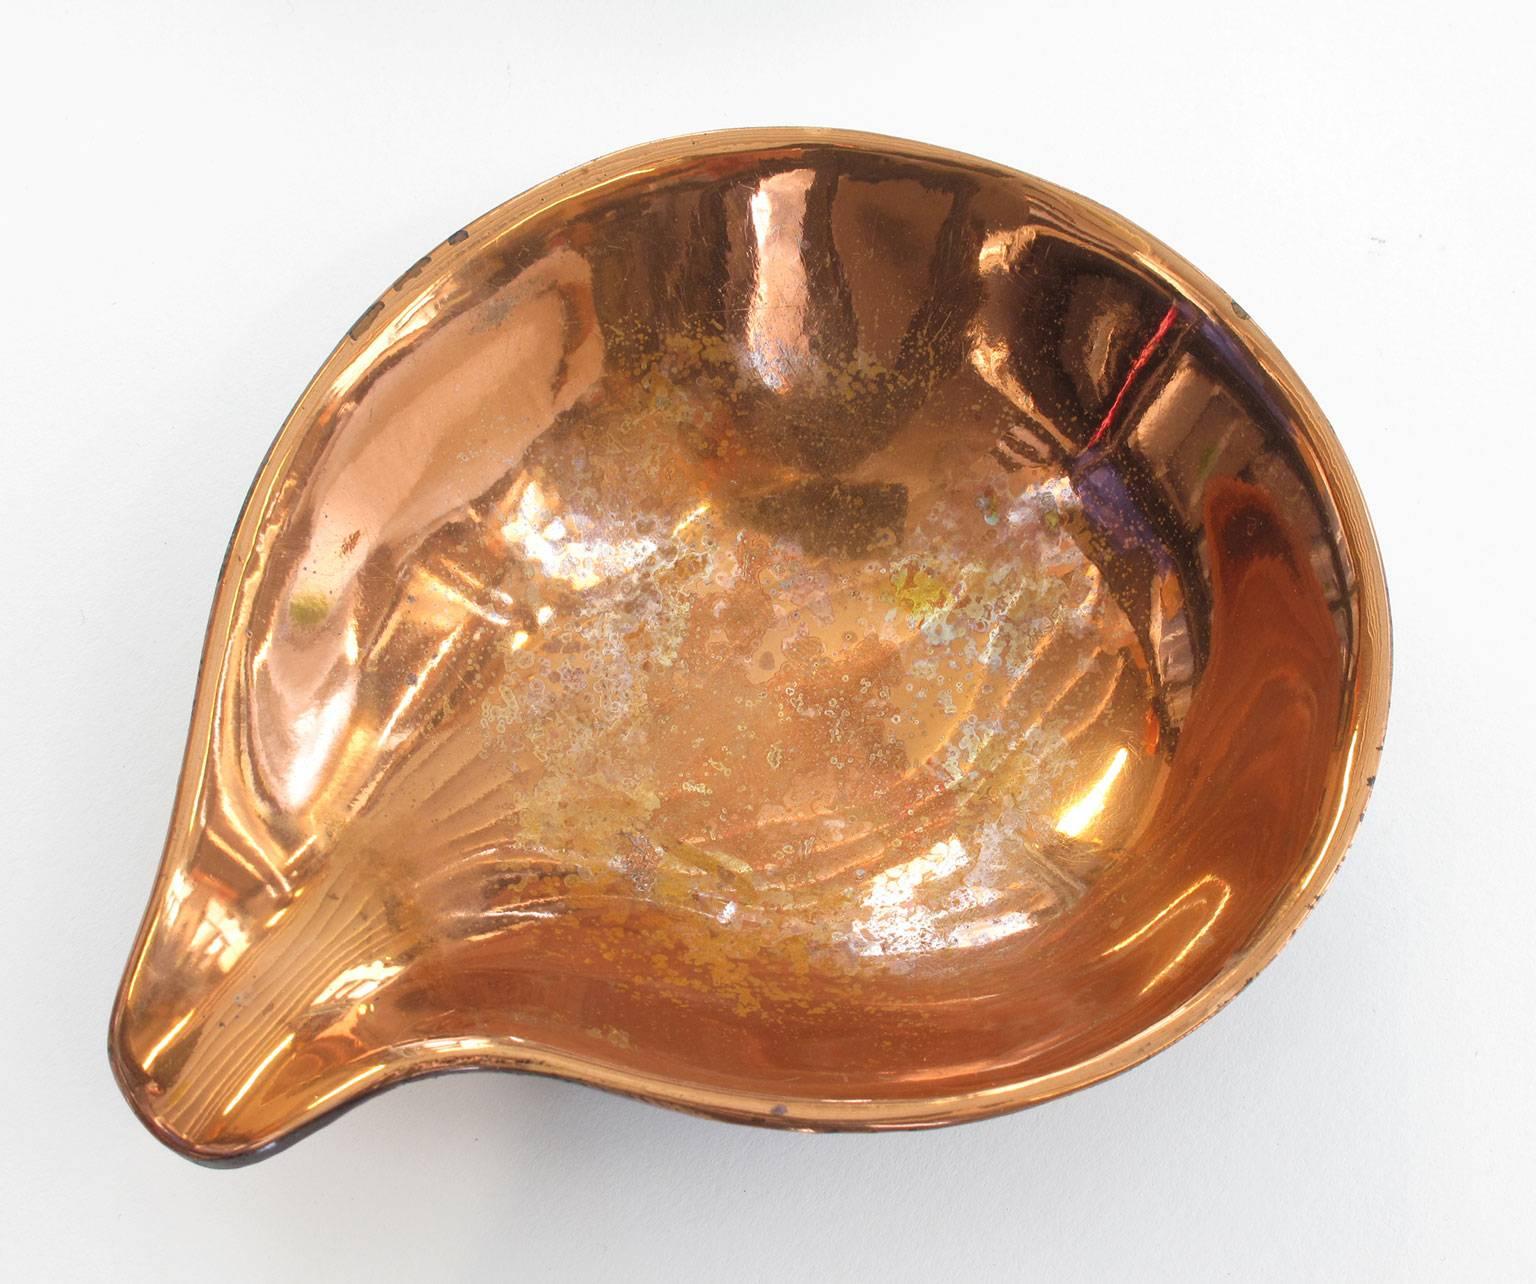 Set of Three Ben Seibel Biomorphic Copper Nesting Objects, 1950s For Sale 1